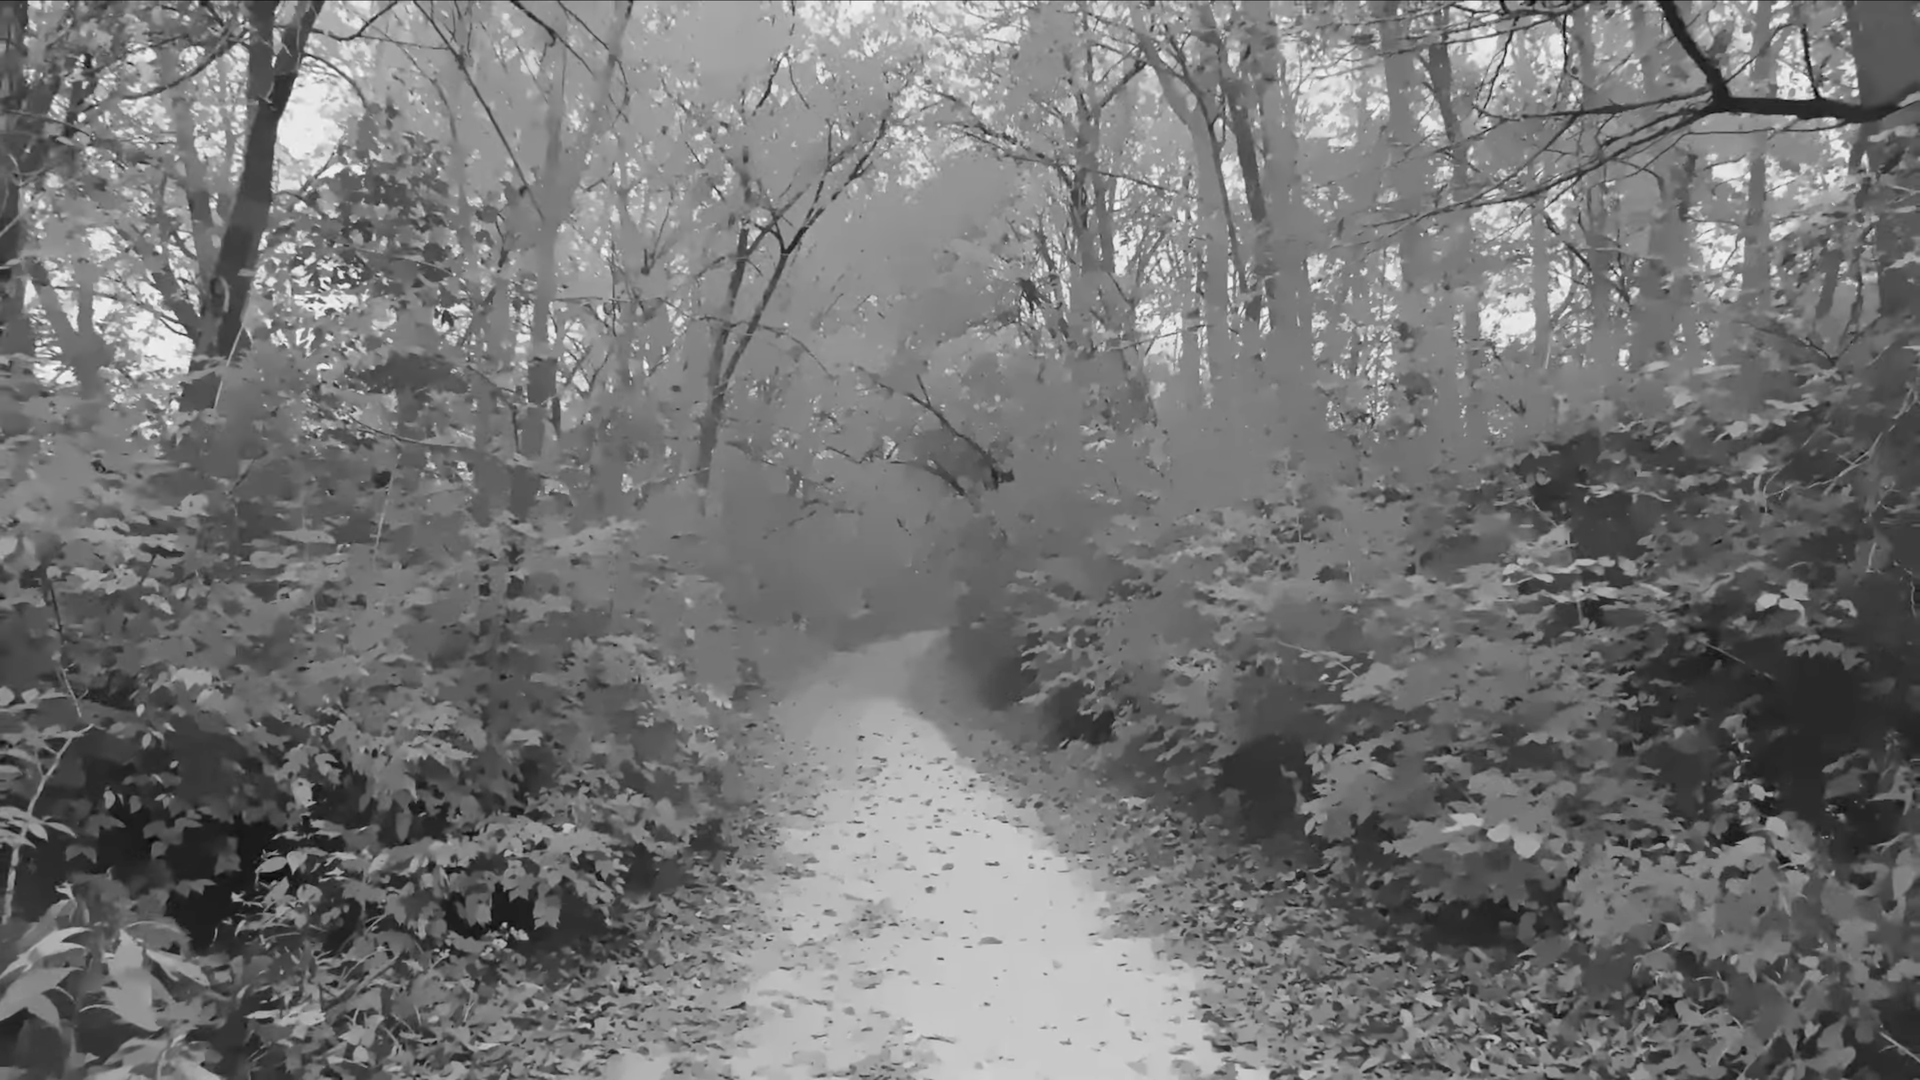 A grayscale forest trail that has been smudged, as if remembering it imperfectly.